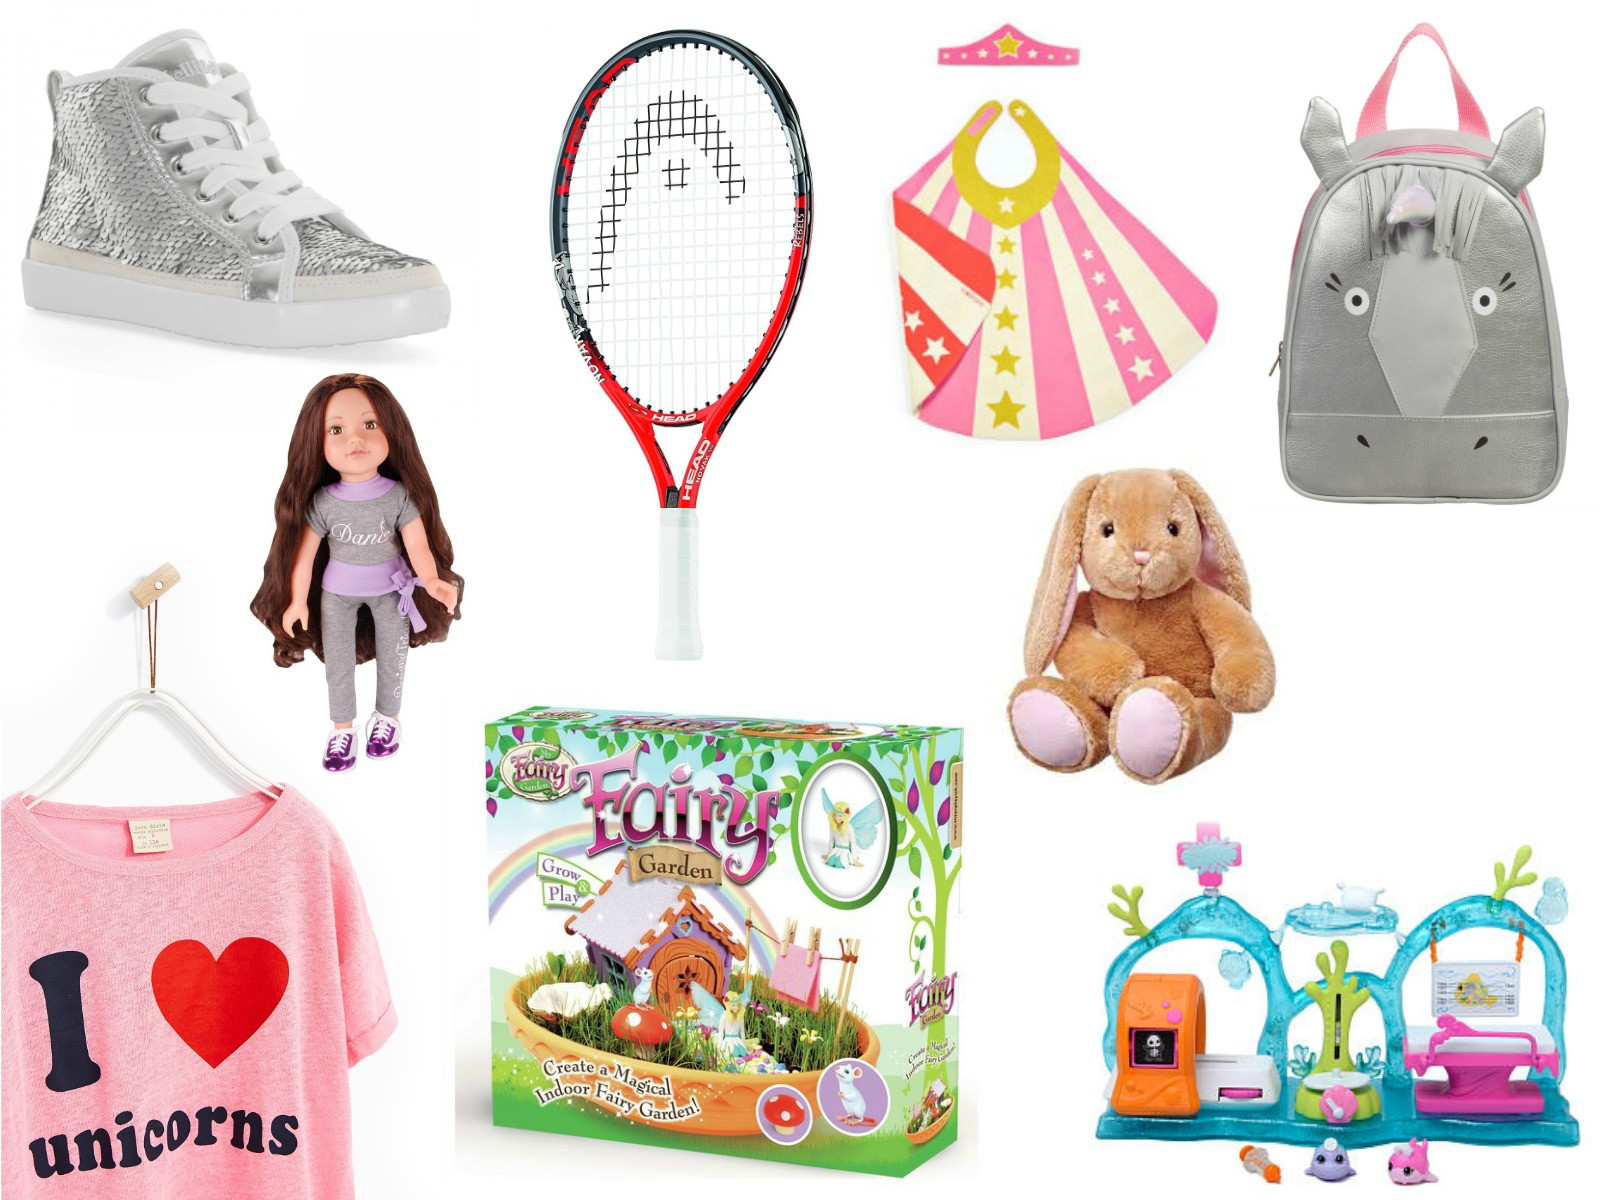 Birthday Gift Ideas For 5 Year Old Girl
 Presents for a five year old Girl